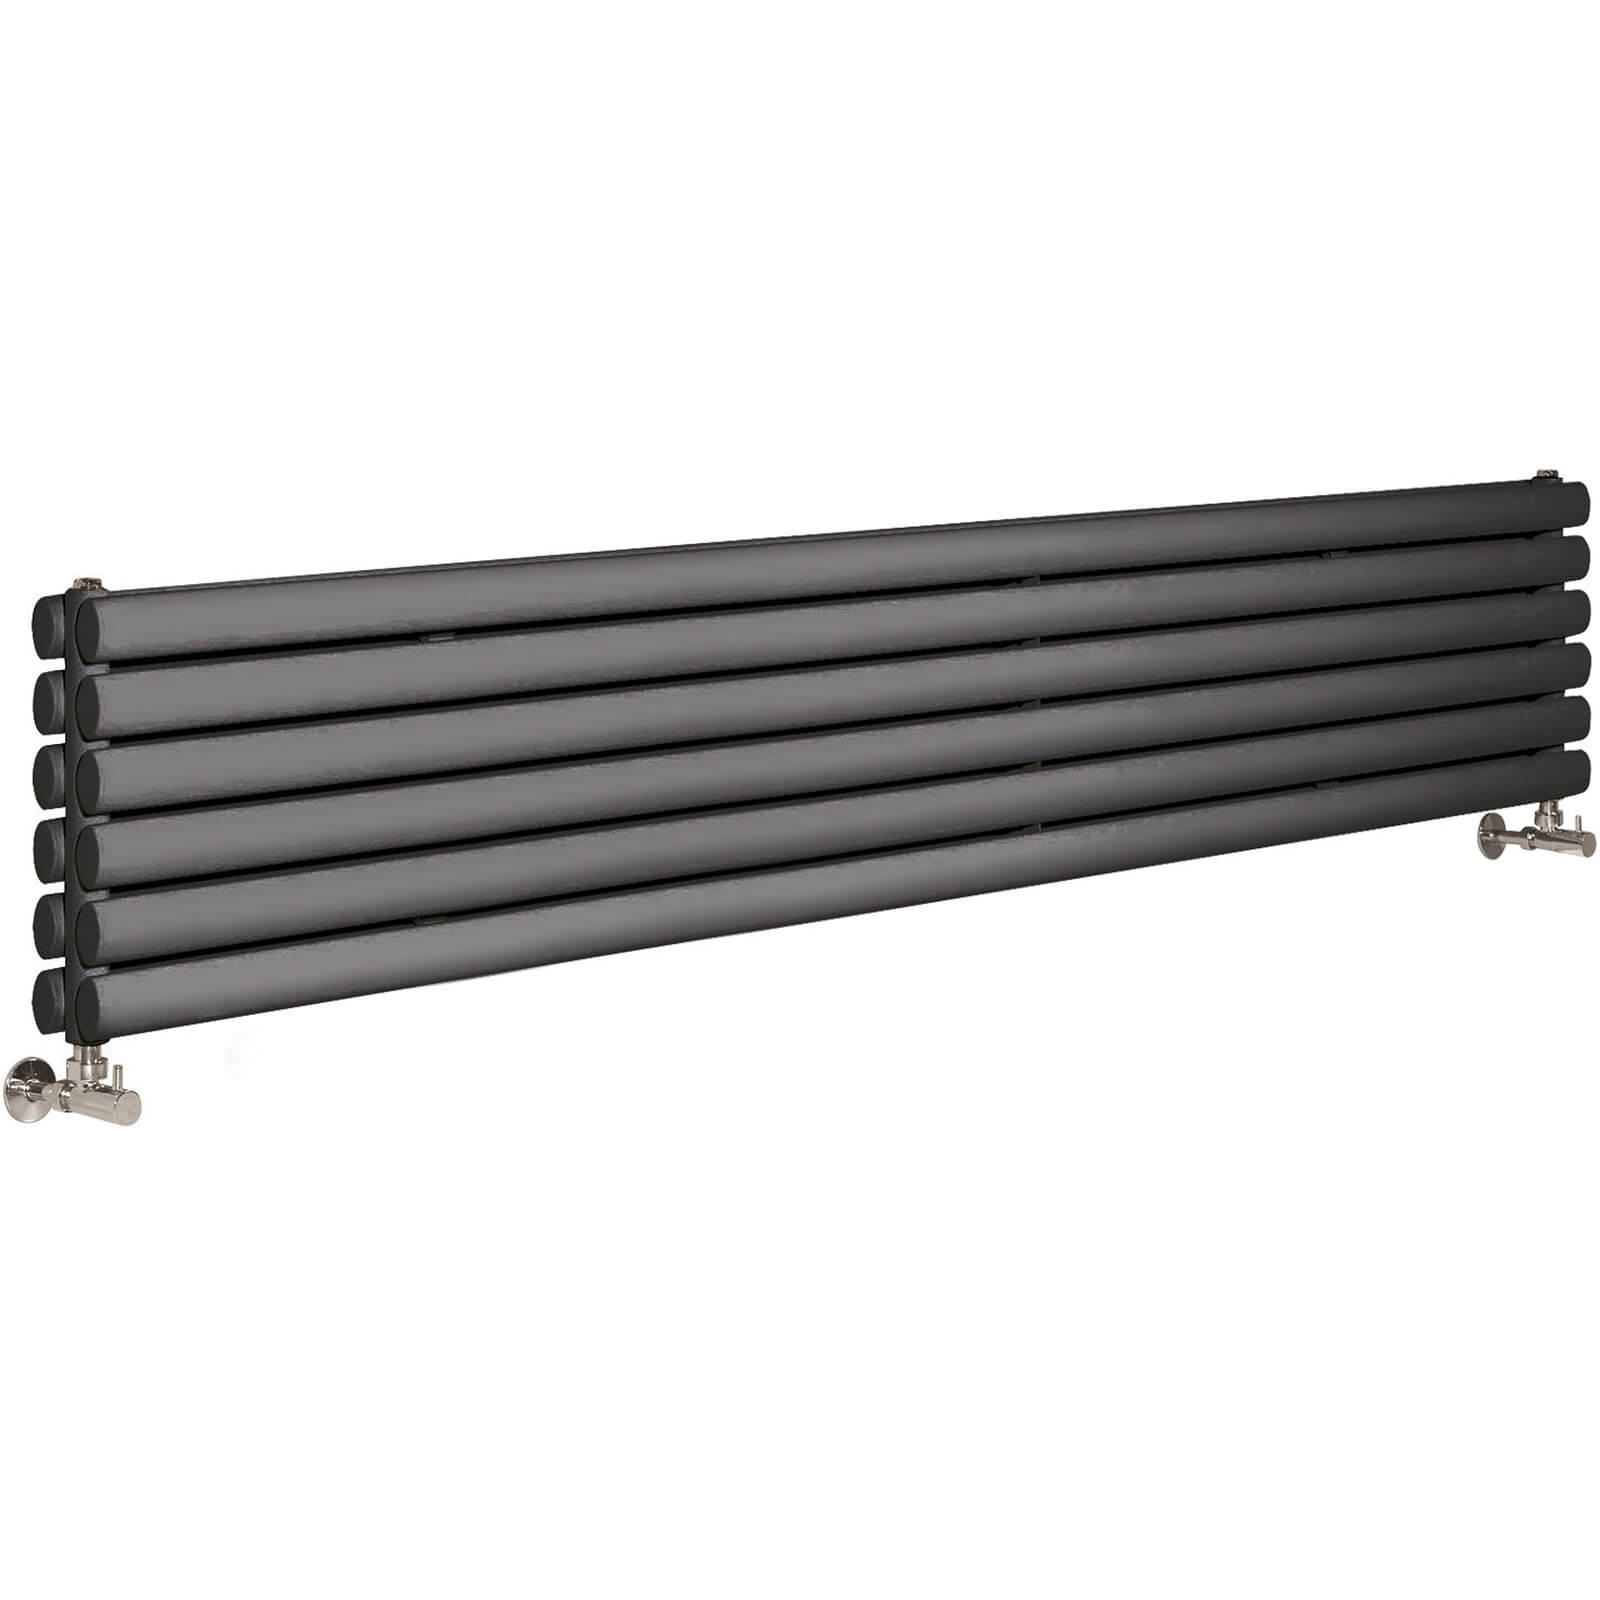 Balterley Embrace Double Panel Radiator - 354 x 1500mm - Anthracite